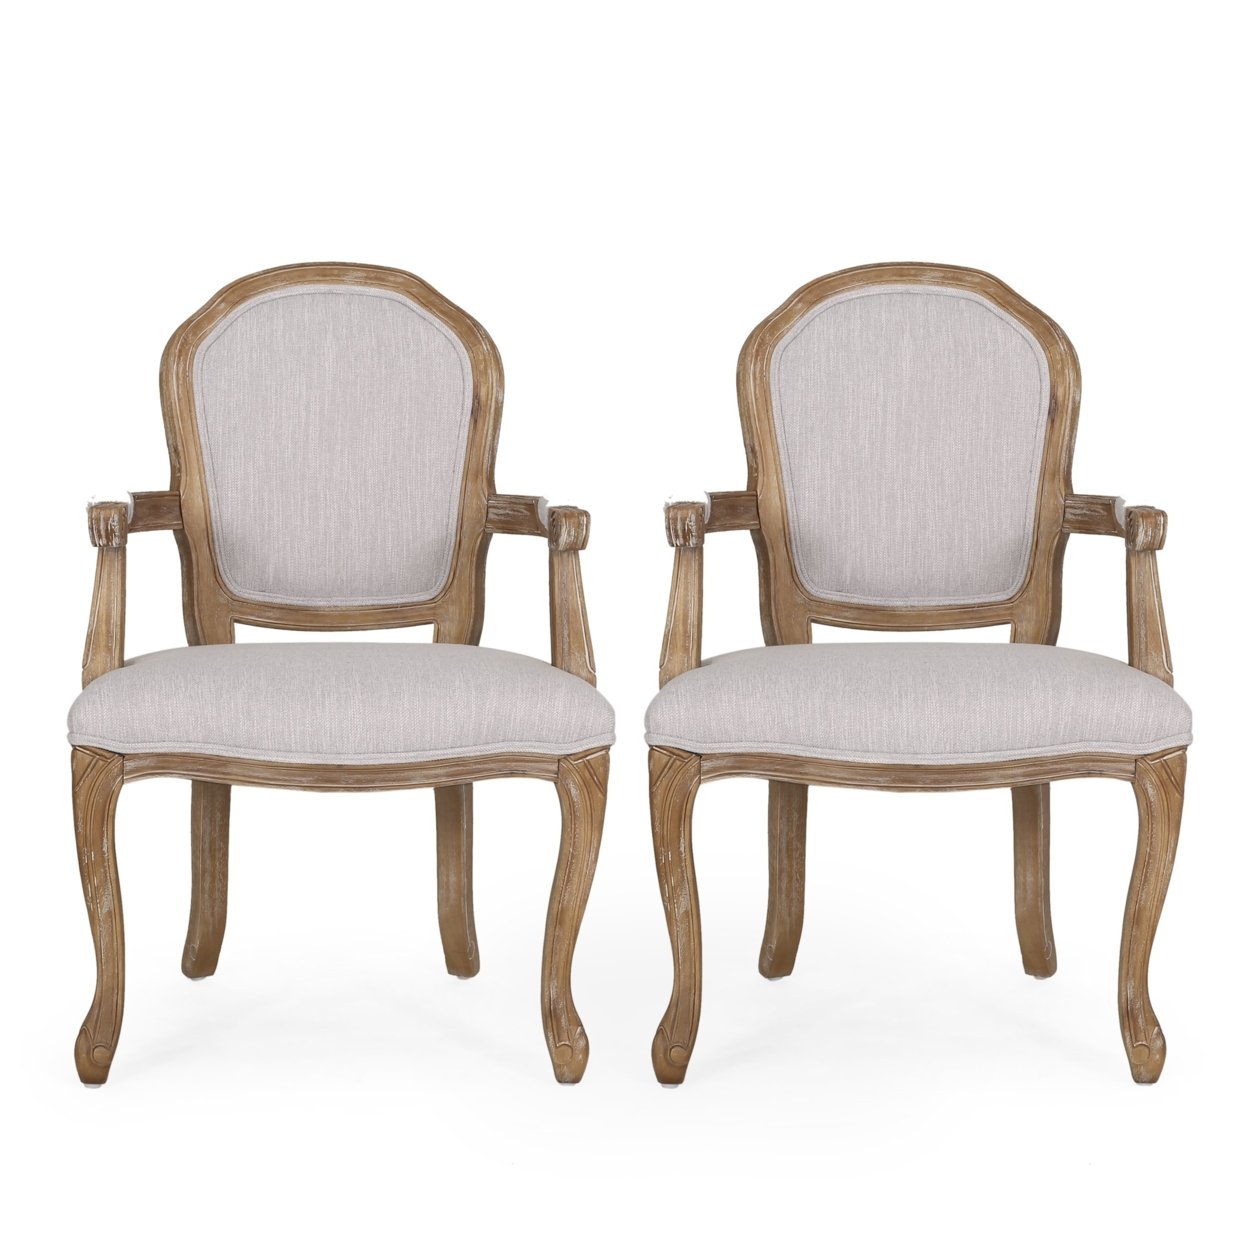 Fairgreens Traditional Upholstered Dining Chairs, Set Of 2 - Light Grey